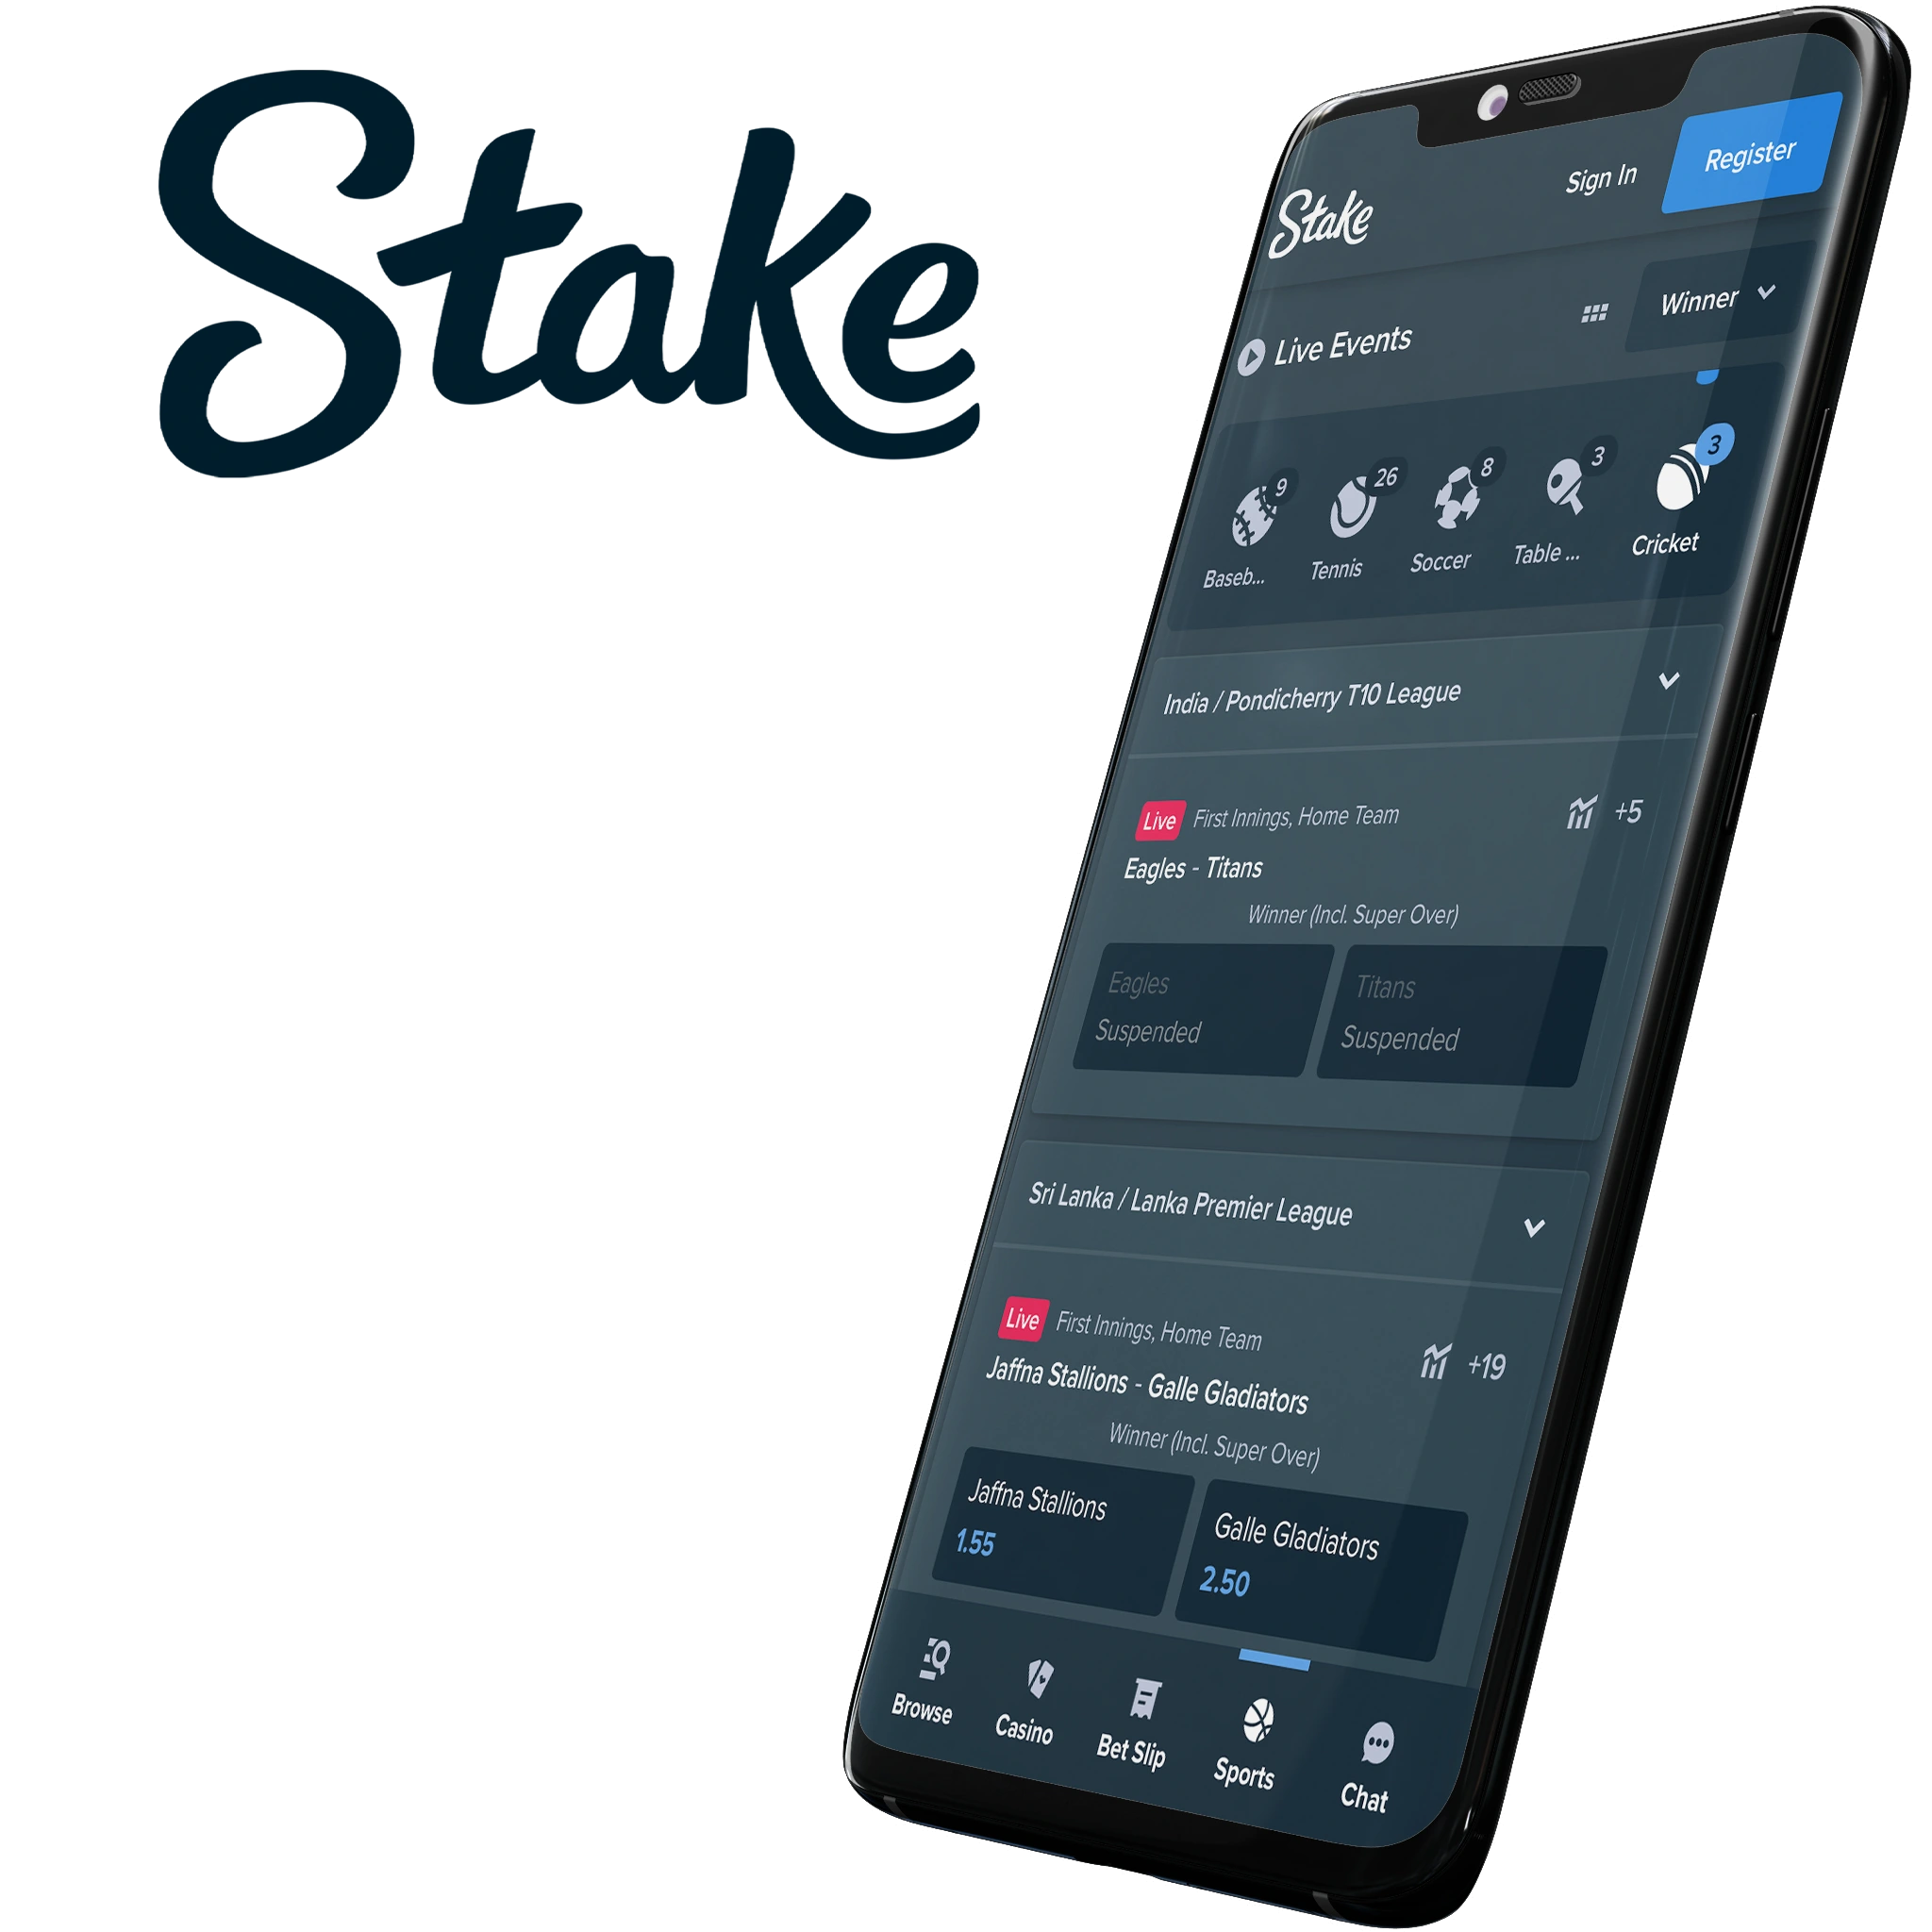 Stake App is the choice of Indian users who care about winning from cricket betting.